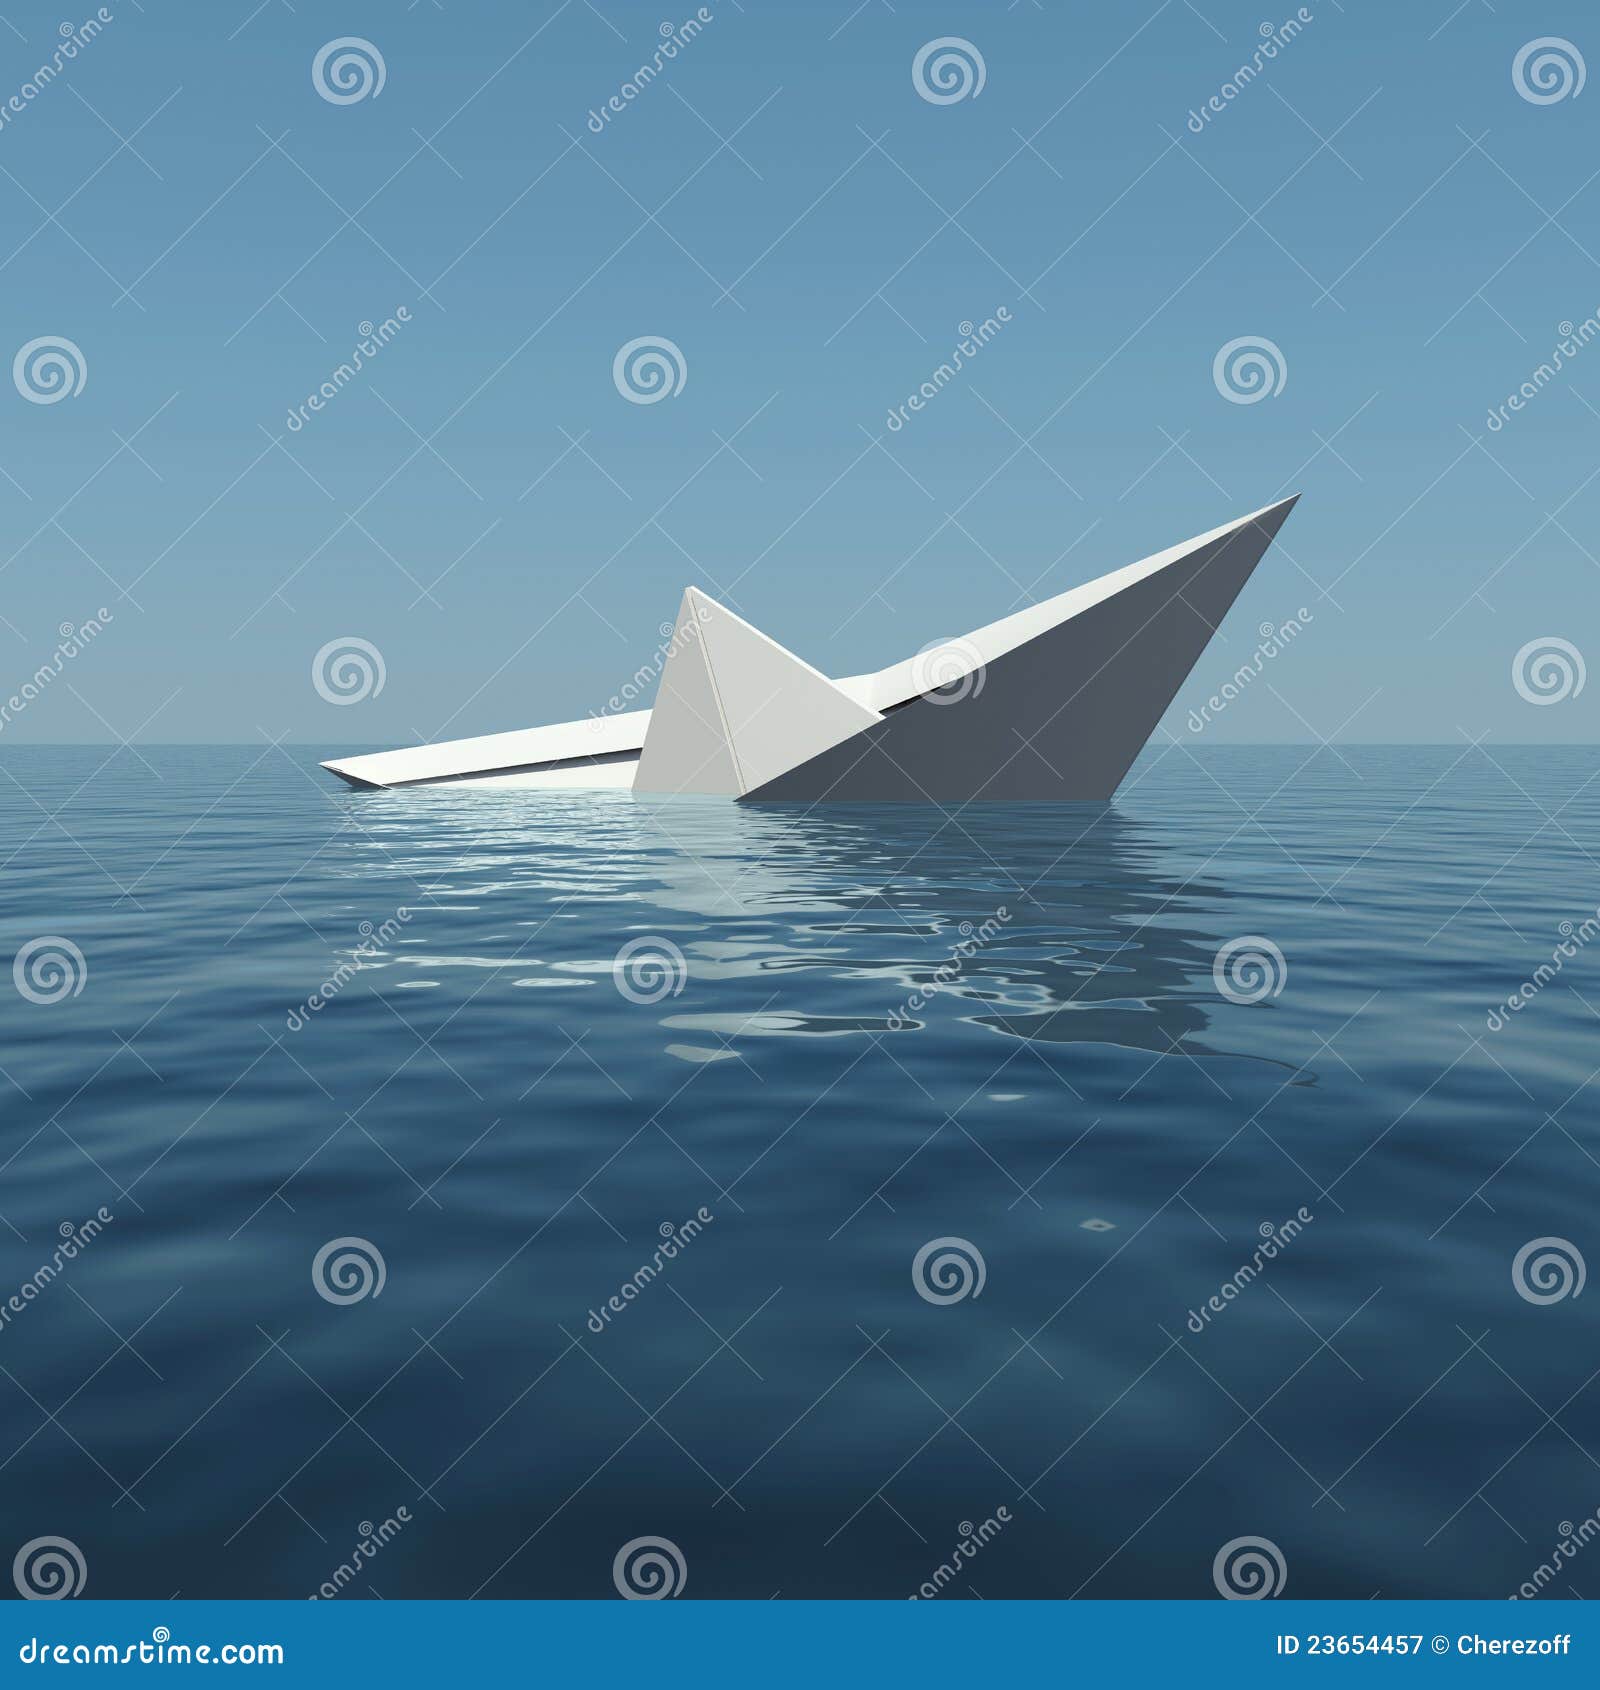 Paper Boat Is Sinking Into The Sea Stock Illustration